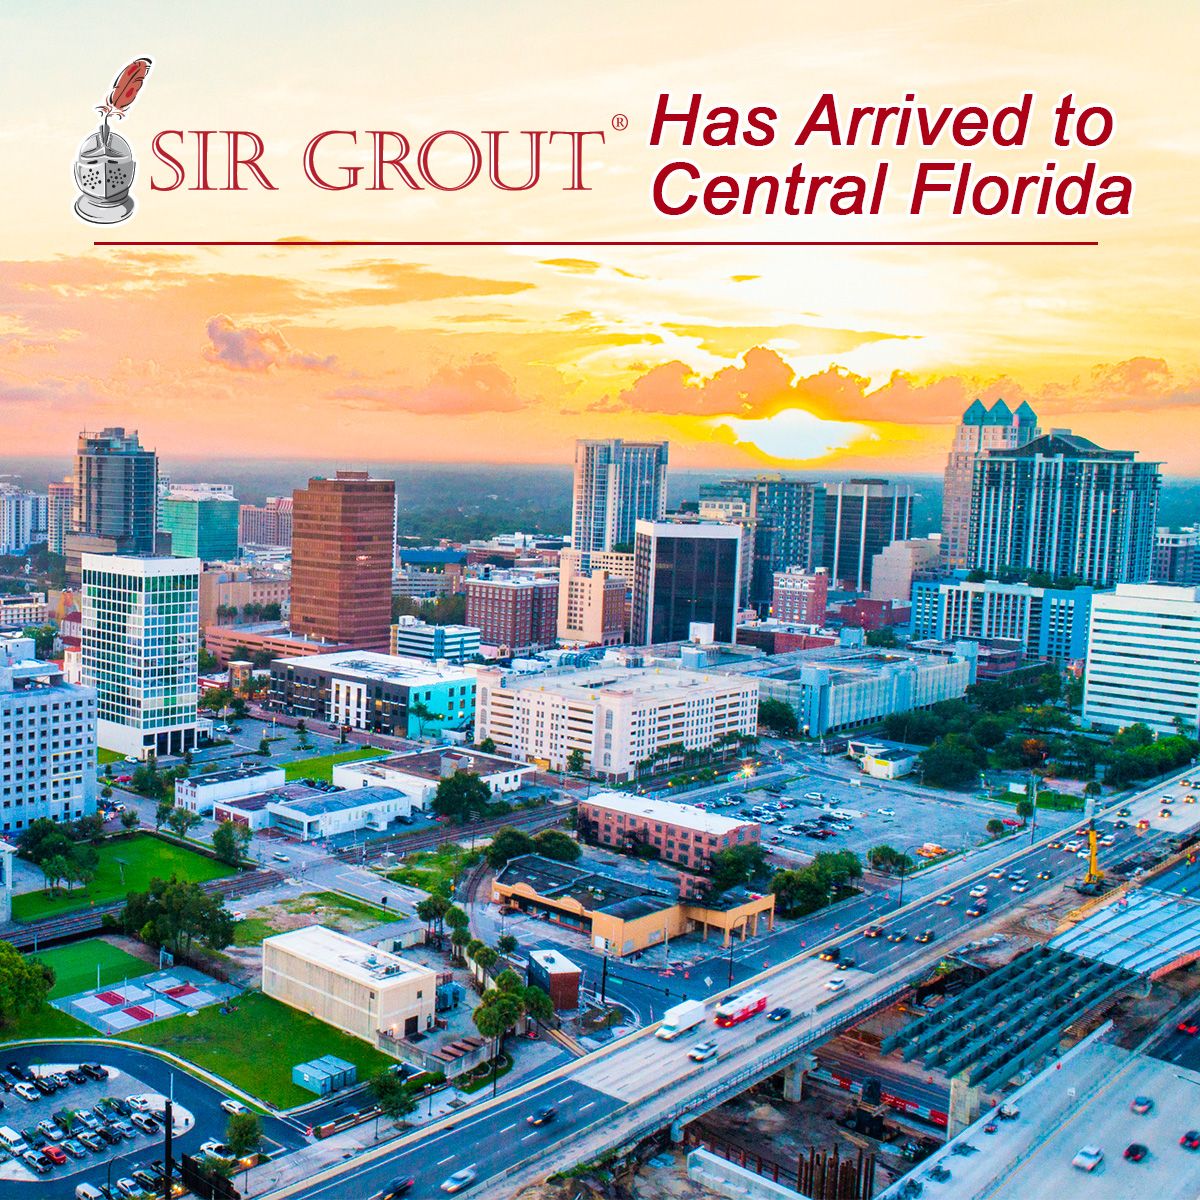 Sir Grout Has Arrived to Central Florida